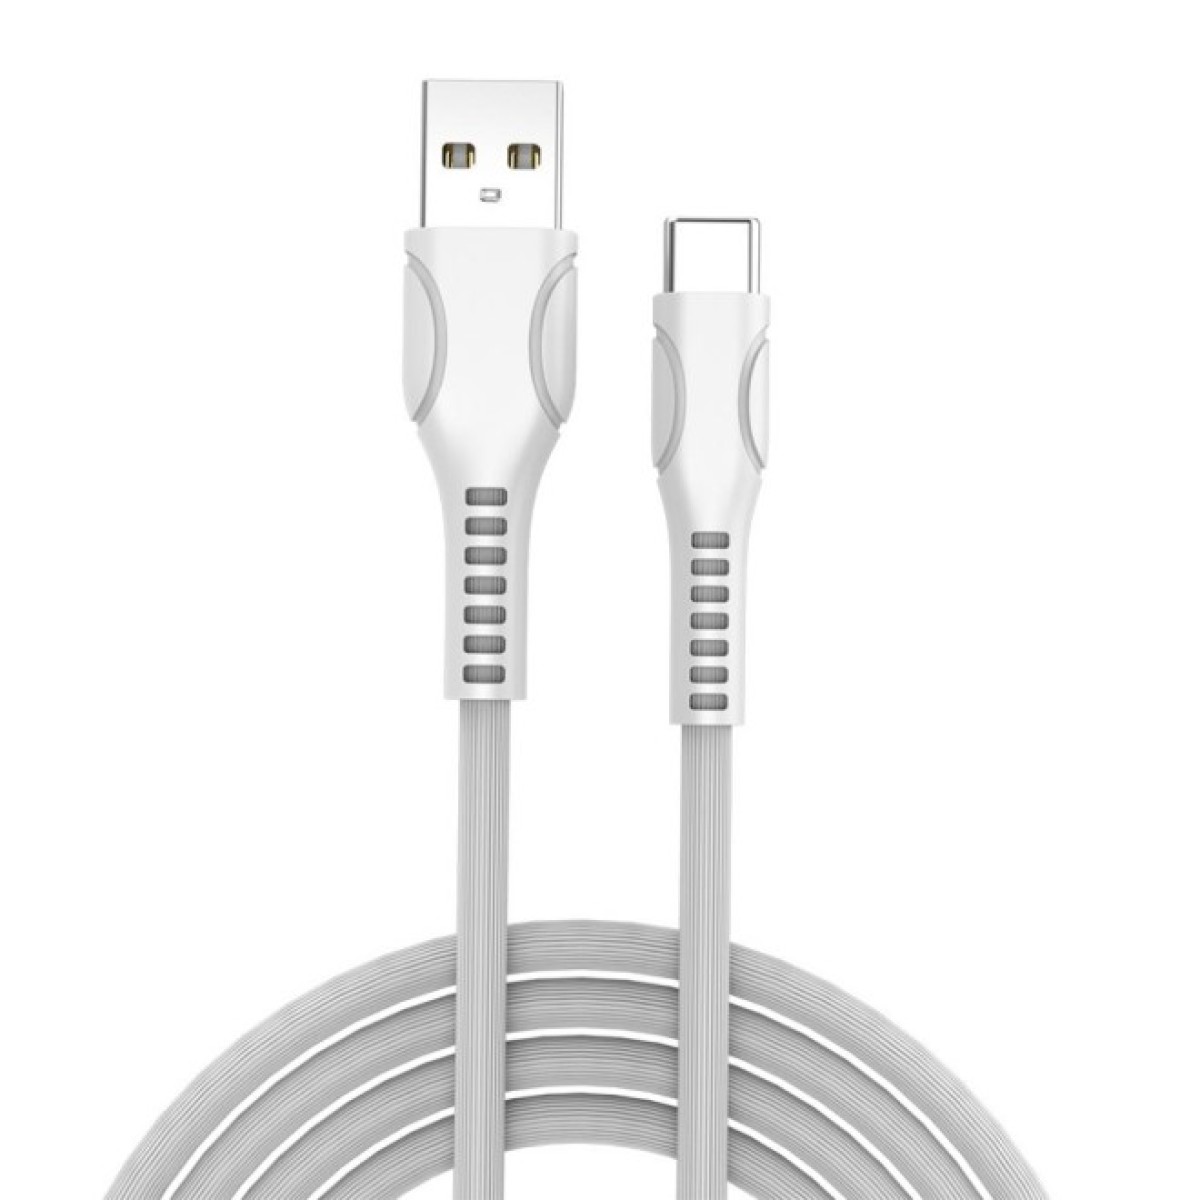 Дата кабель USB 2.0 AM to Type-C 1.0m line-drawing white ColorWay (CW-CBUC029-WH) 256_256.jpg